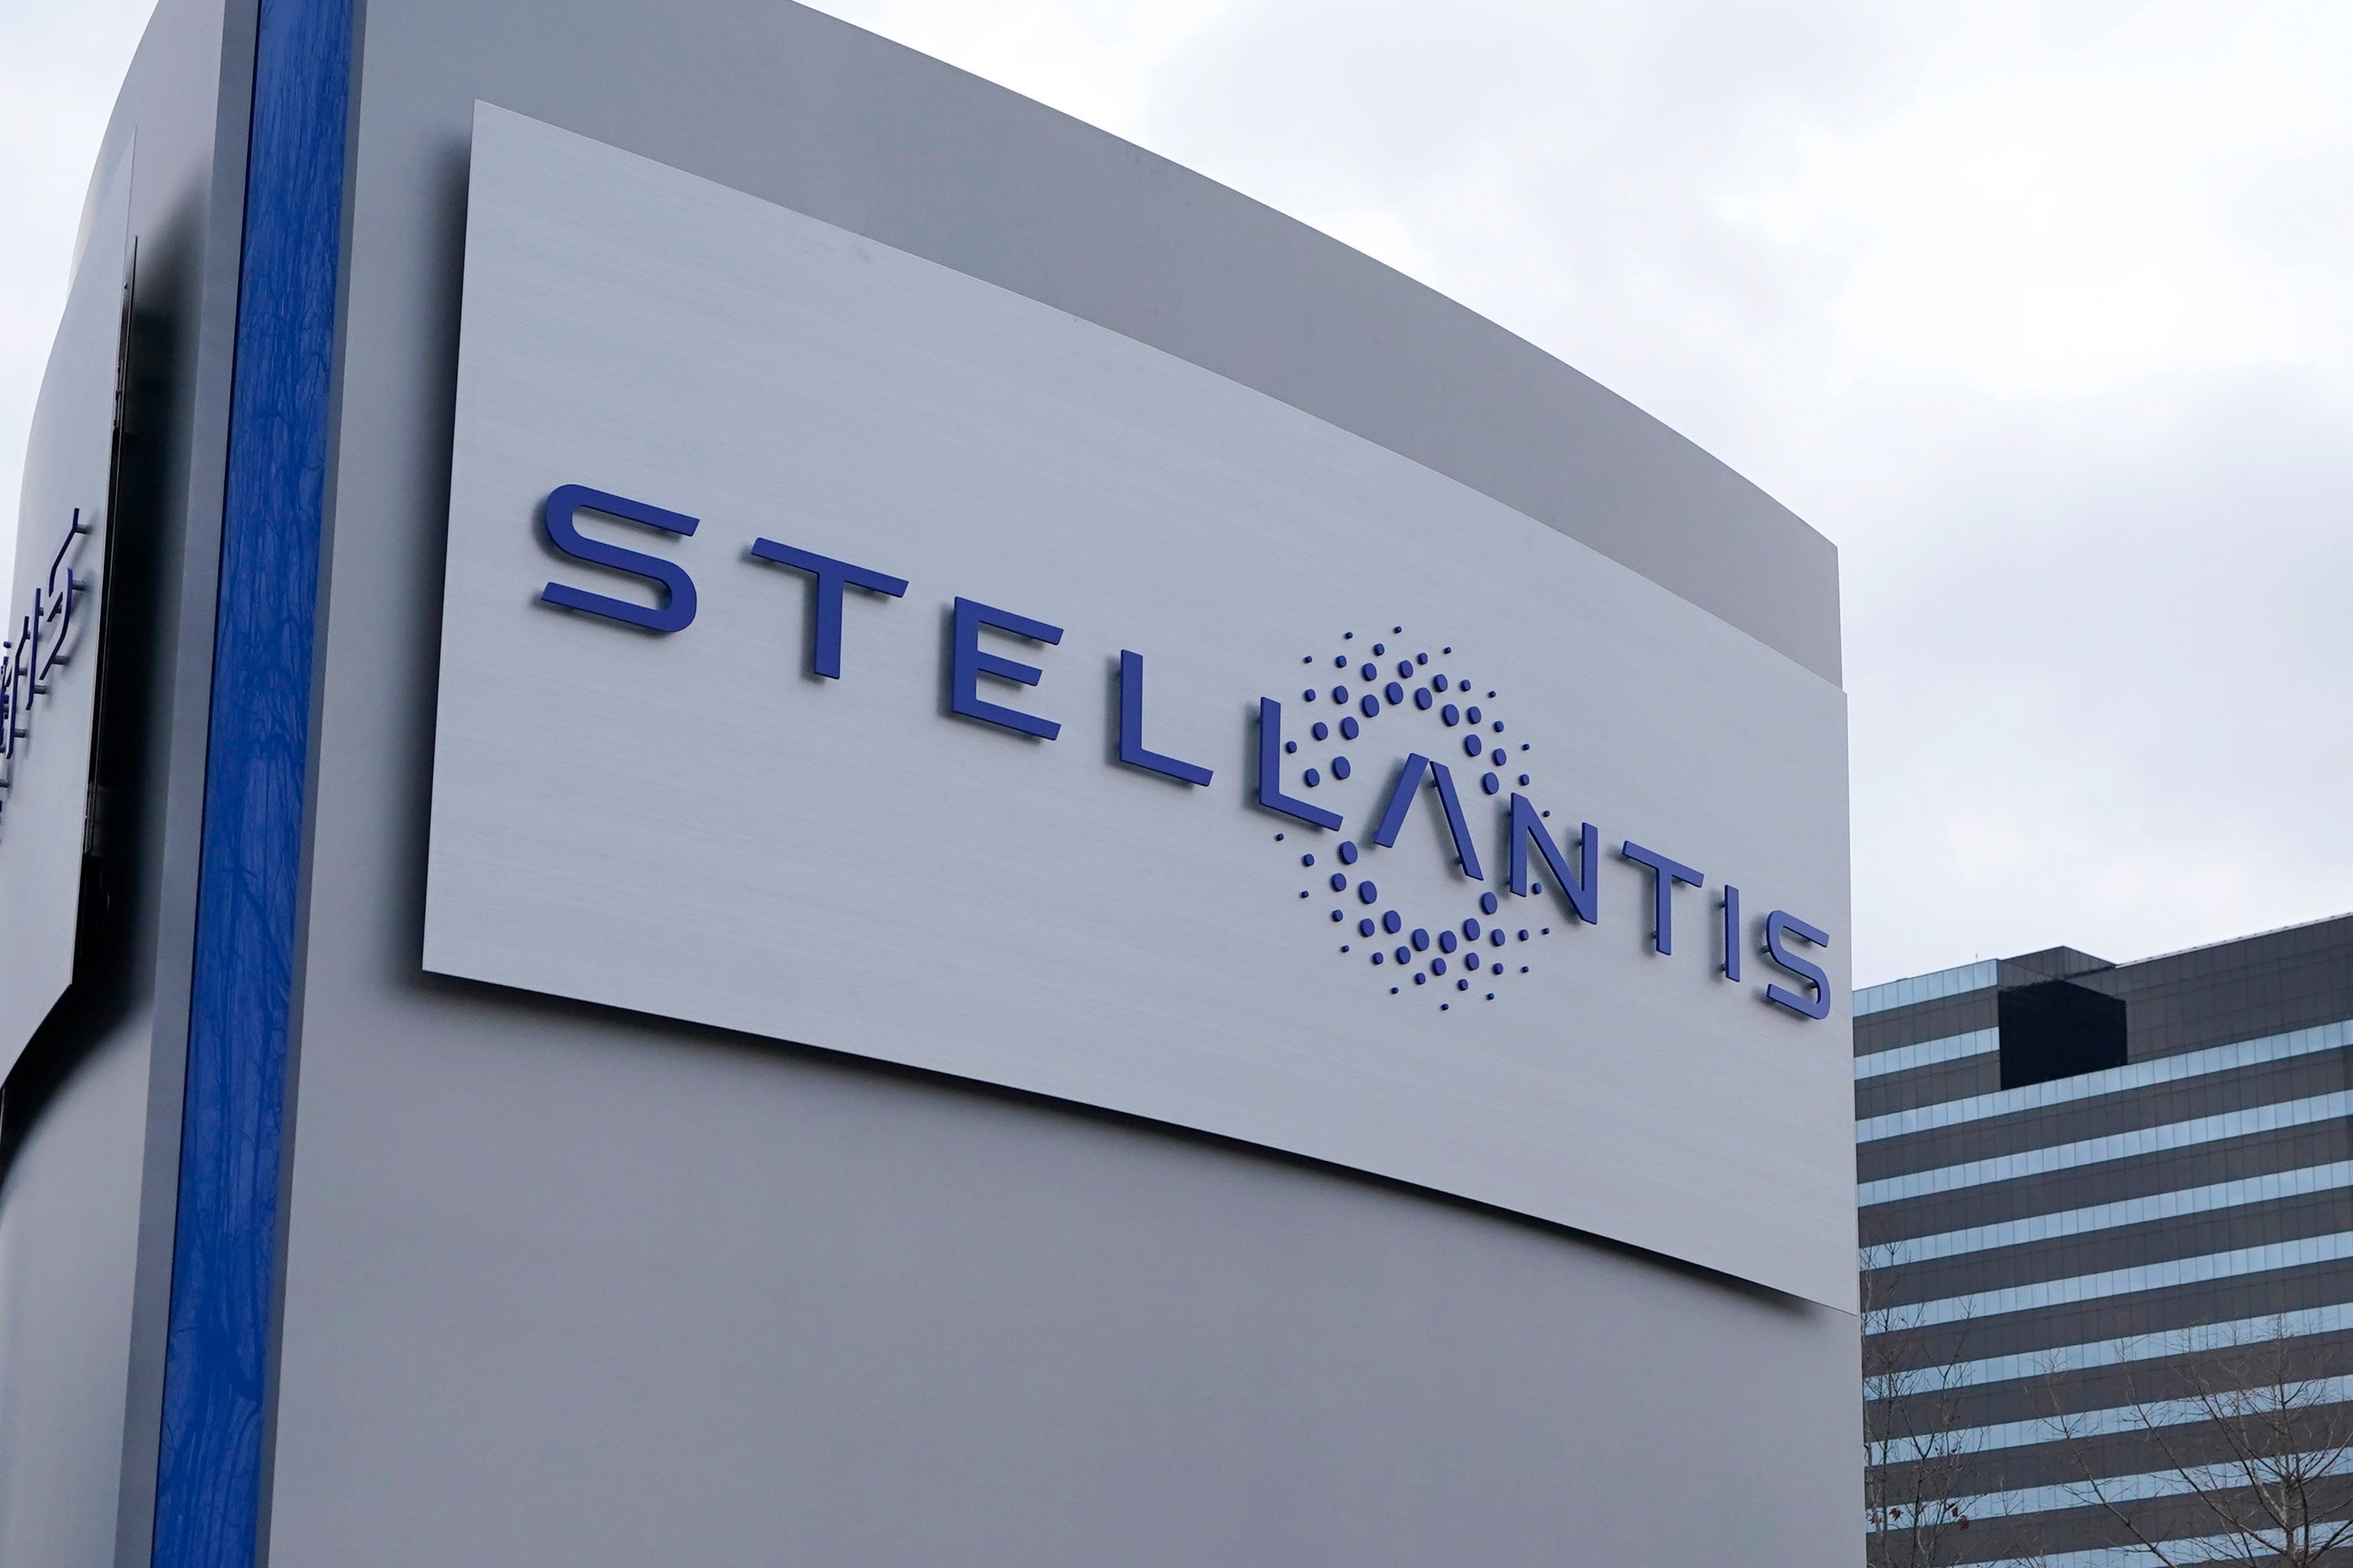 Stellantis to offer buyouts amid electric vehicle transition The